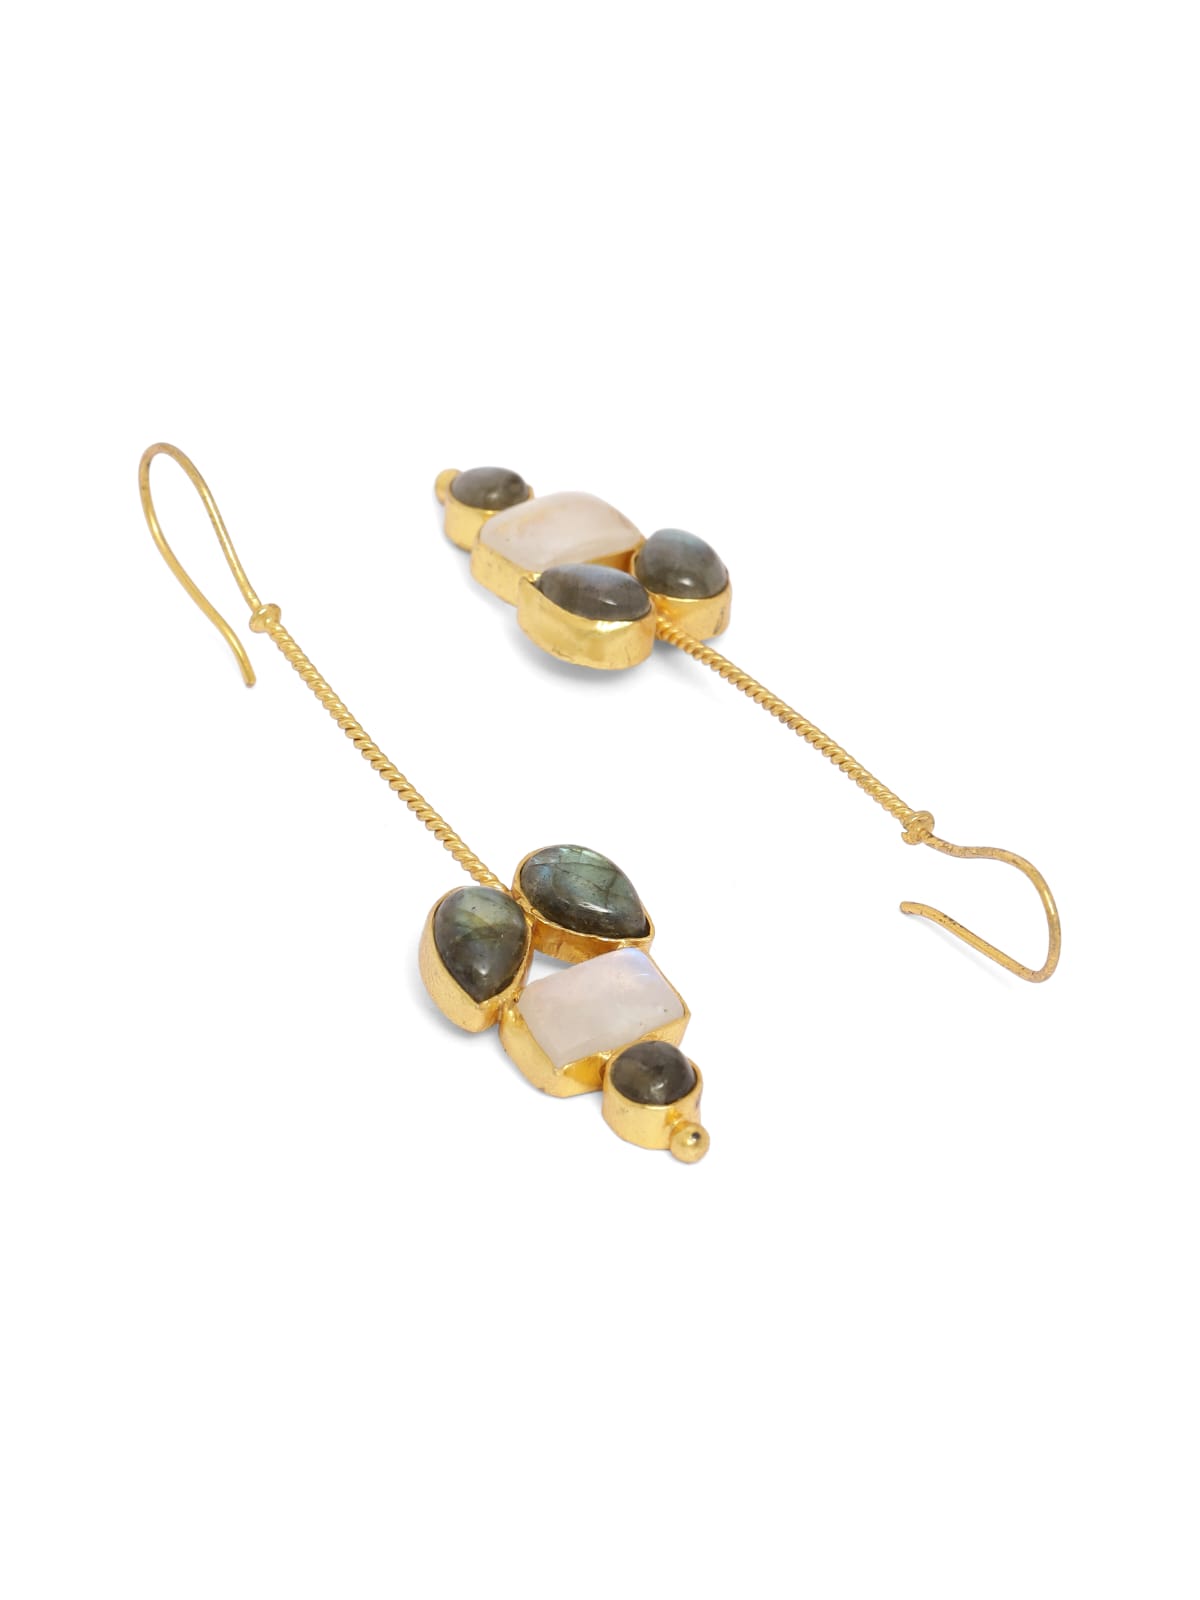 Sterling Silver hook earrings with Labradorites and Moonstones in micron Gold plating.